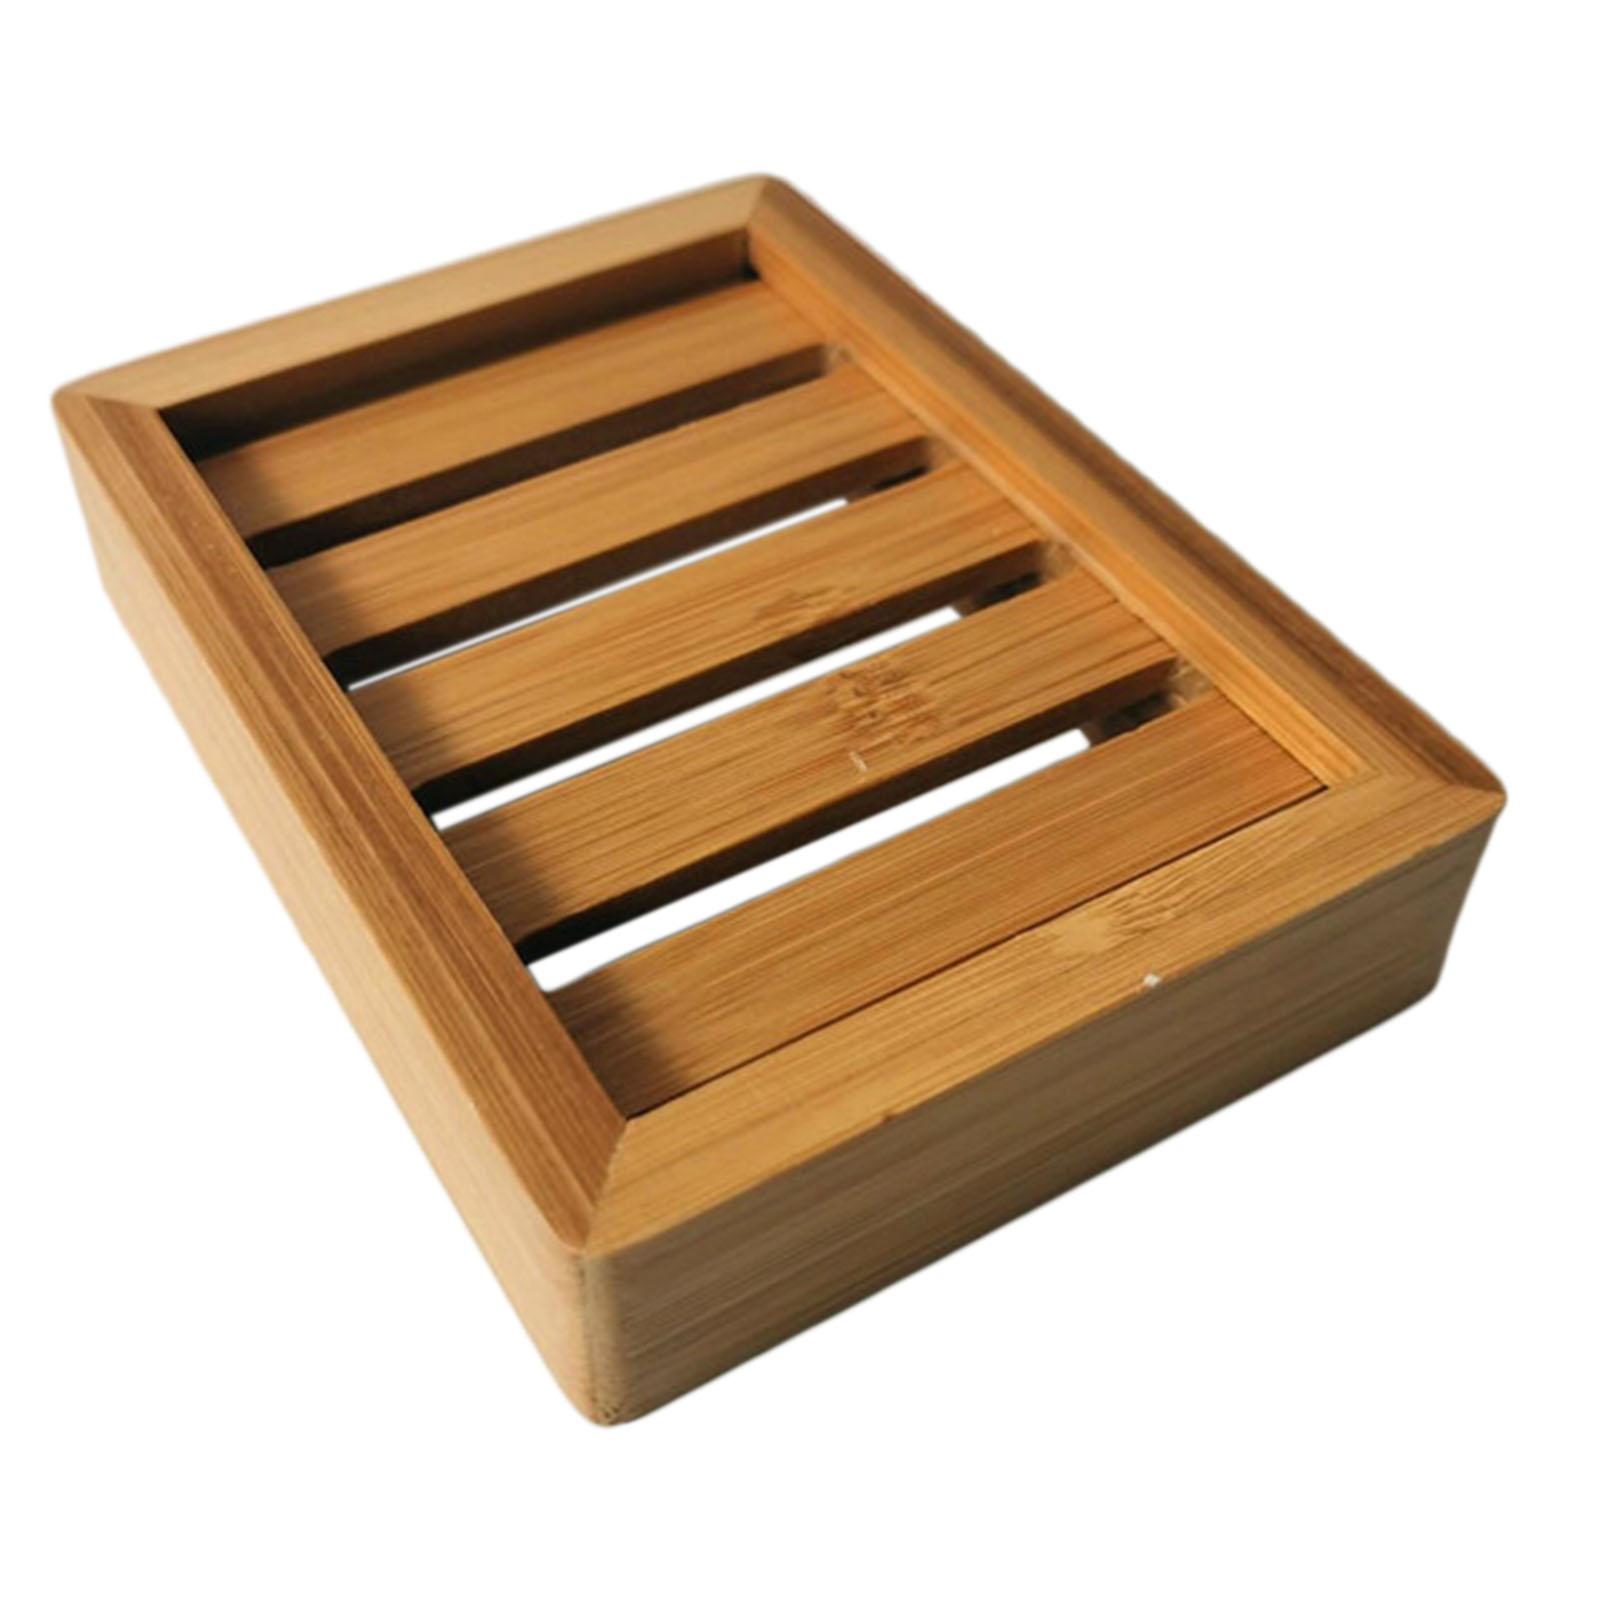 Bamboo Soap Dish Soap Tray Holder Storage Rack Plate Container Bathroom Sink